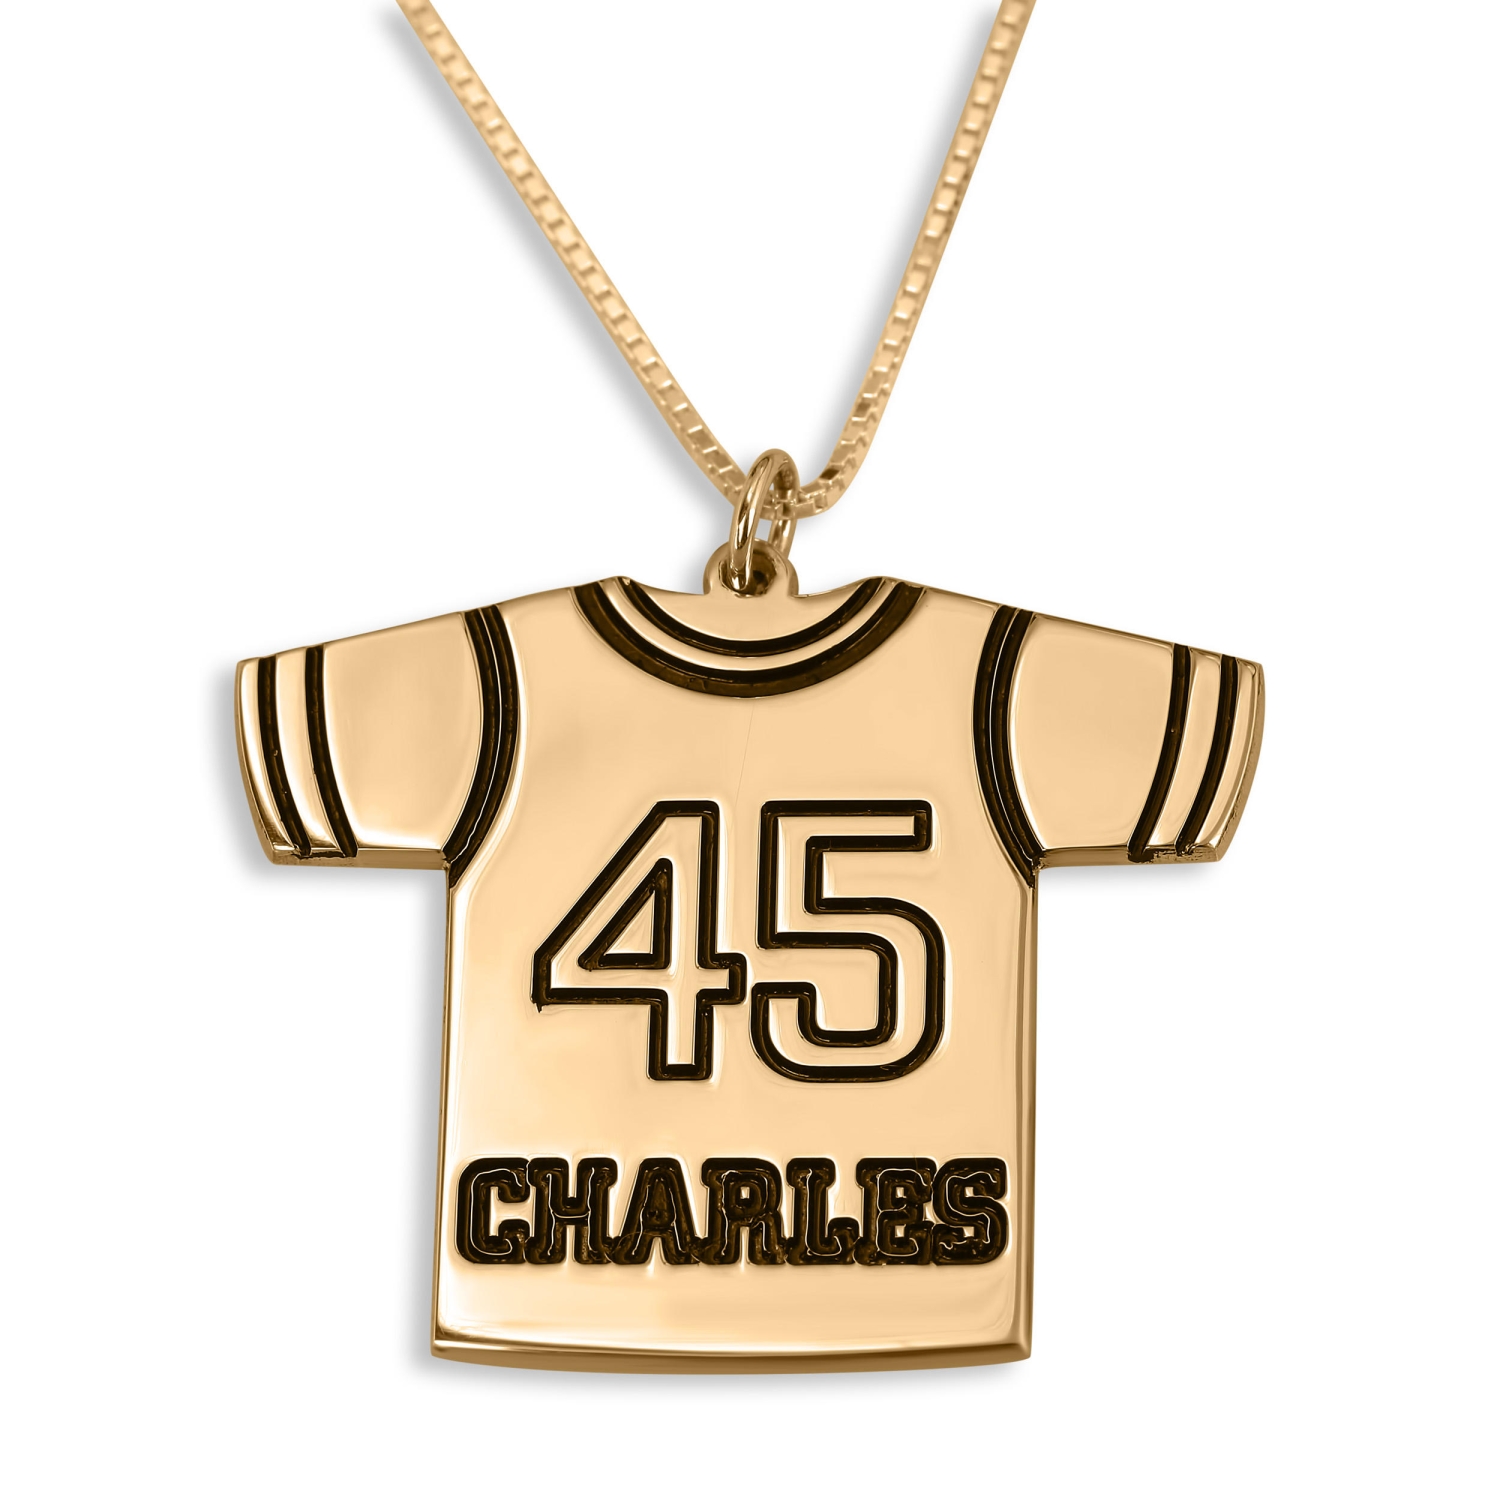 Custom Football Charm or Pendant w/ Name & Number and 2 CZs - PG103624